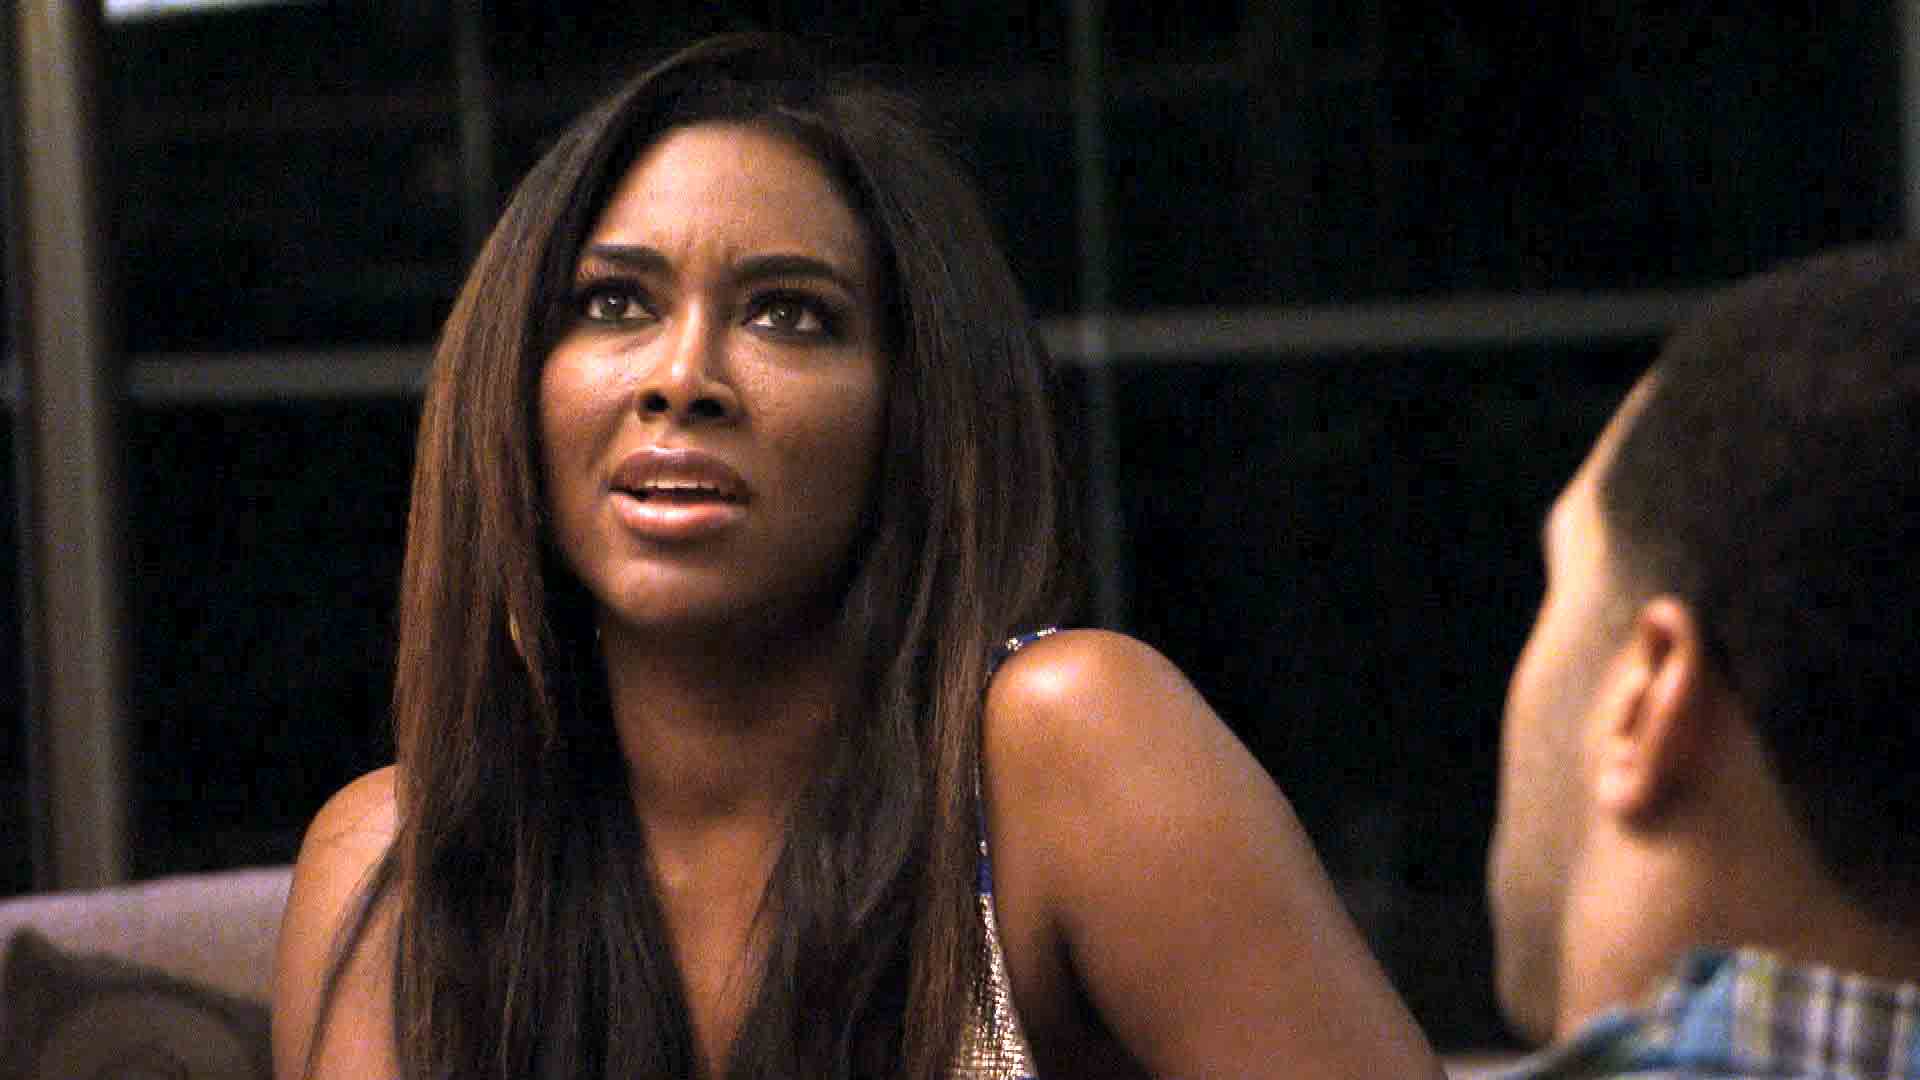 Watch Kenya Moore Confronts Apollo Nida. The Real Housewives